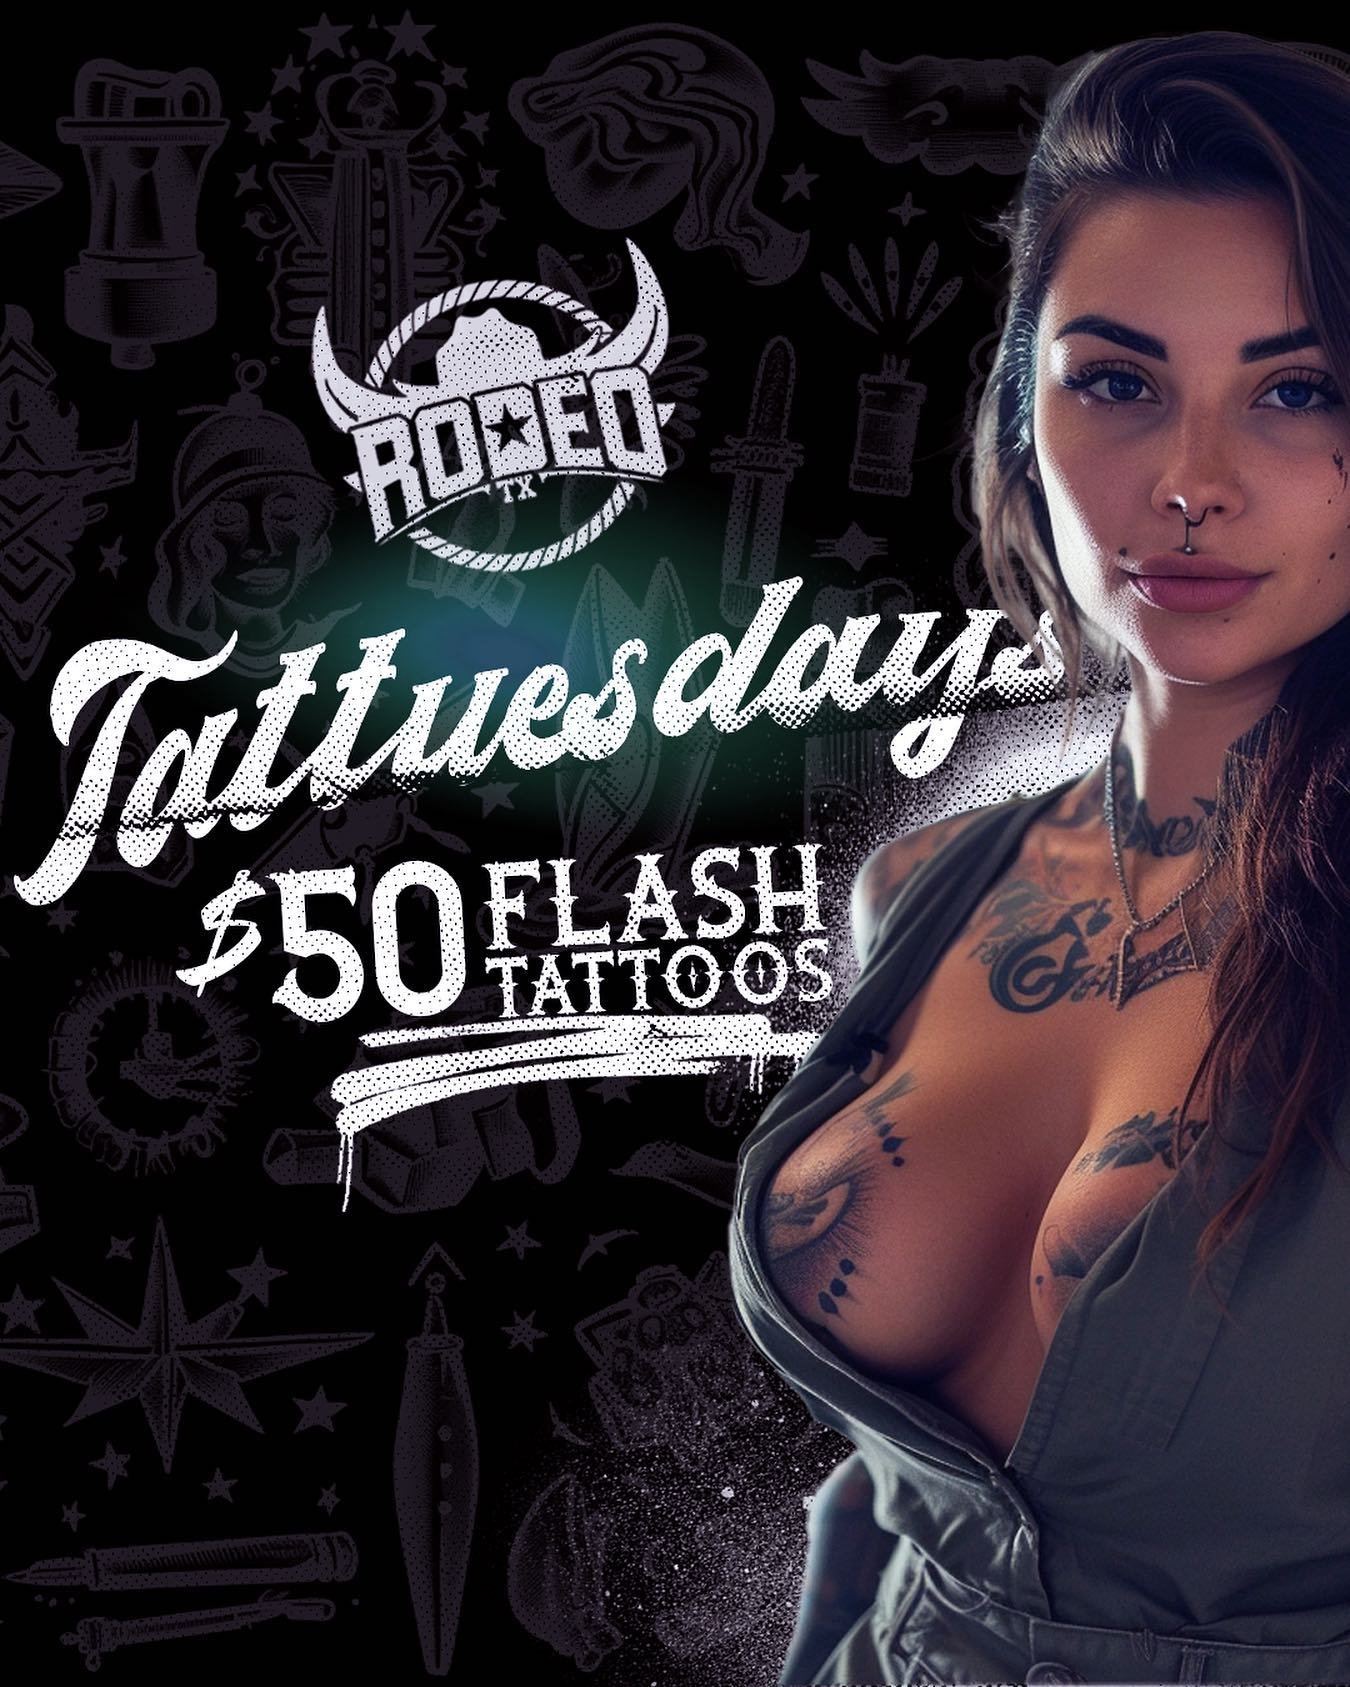 TATTUESDAY IS HERE! @rodeo.dallas